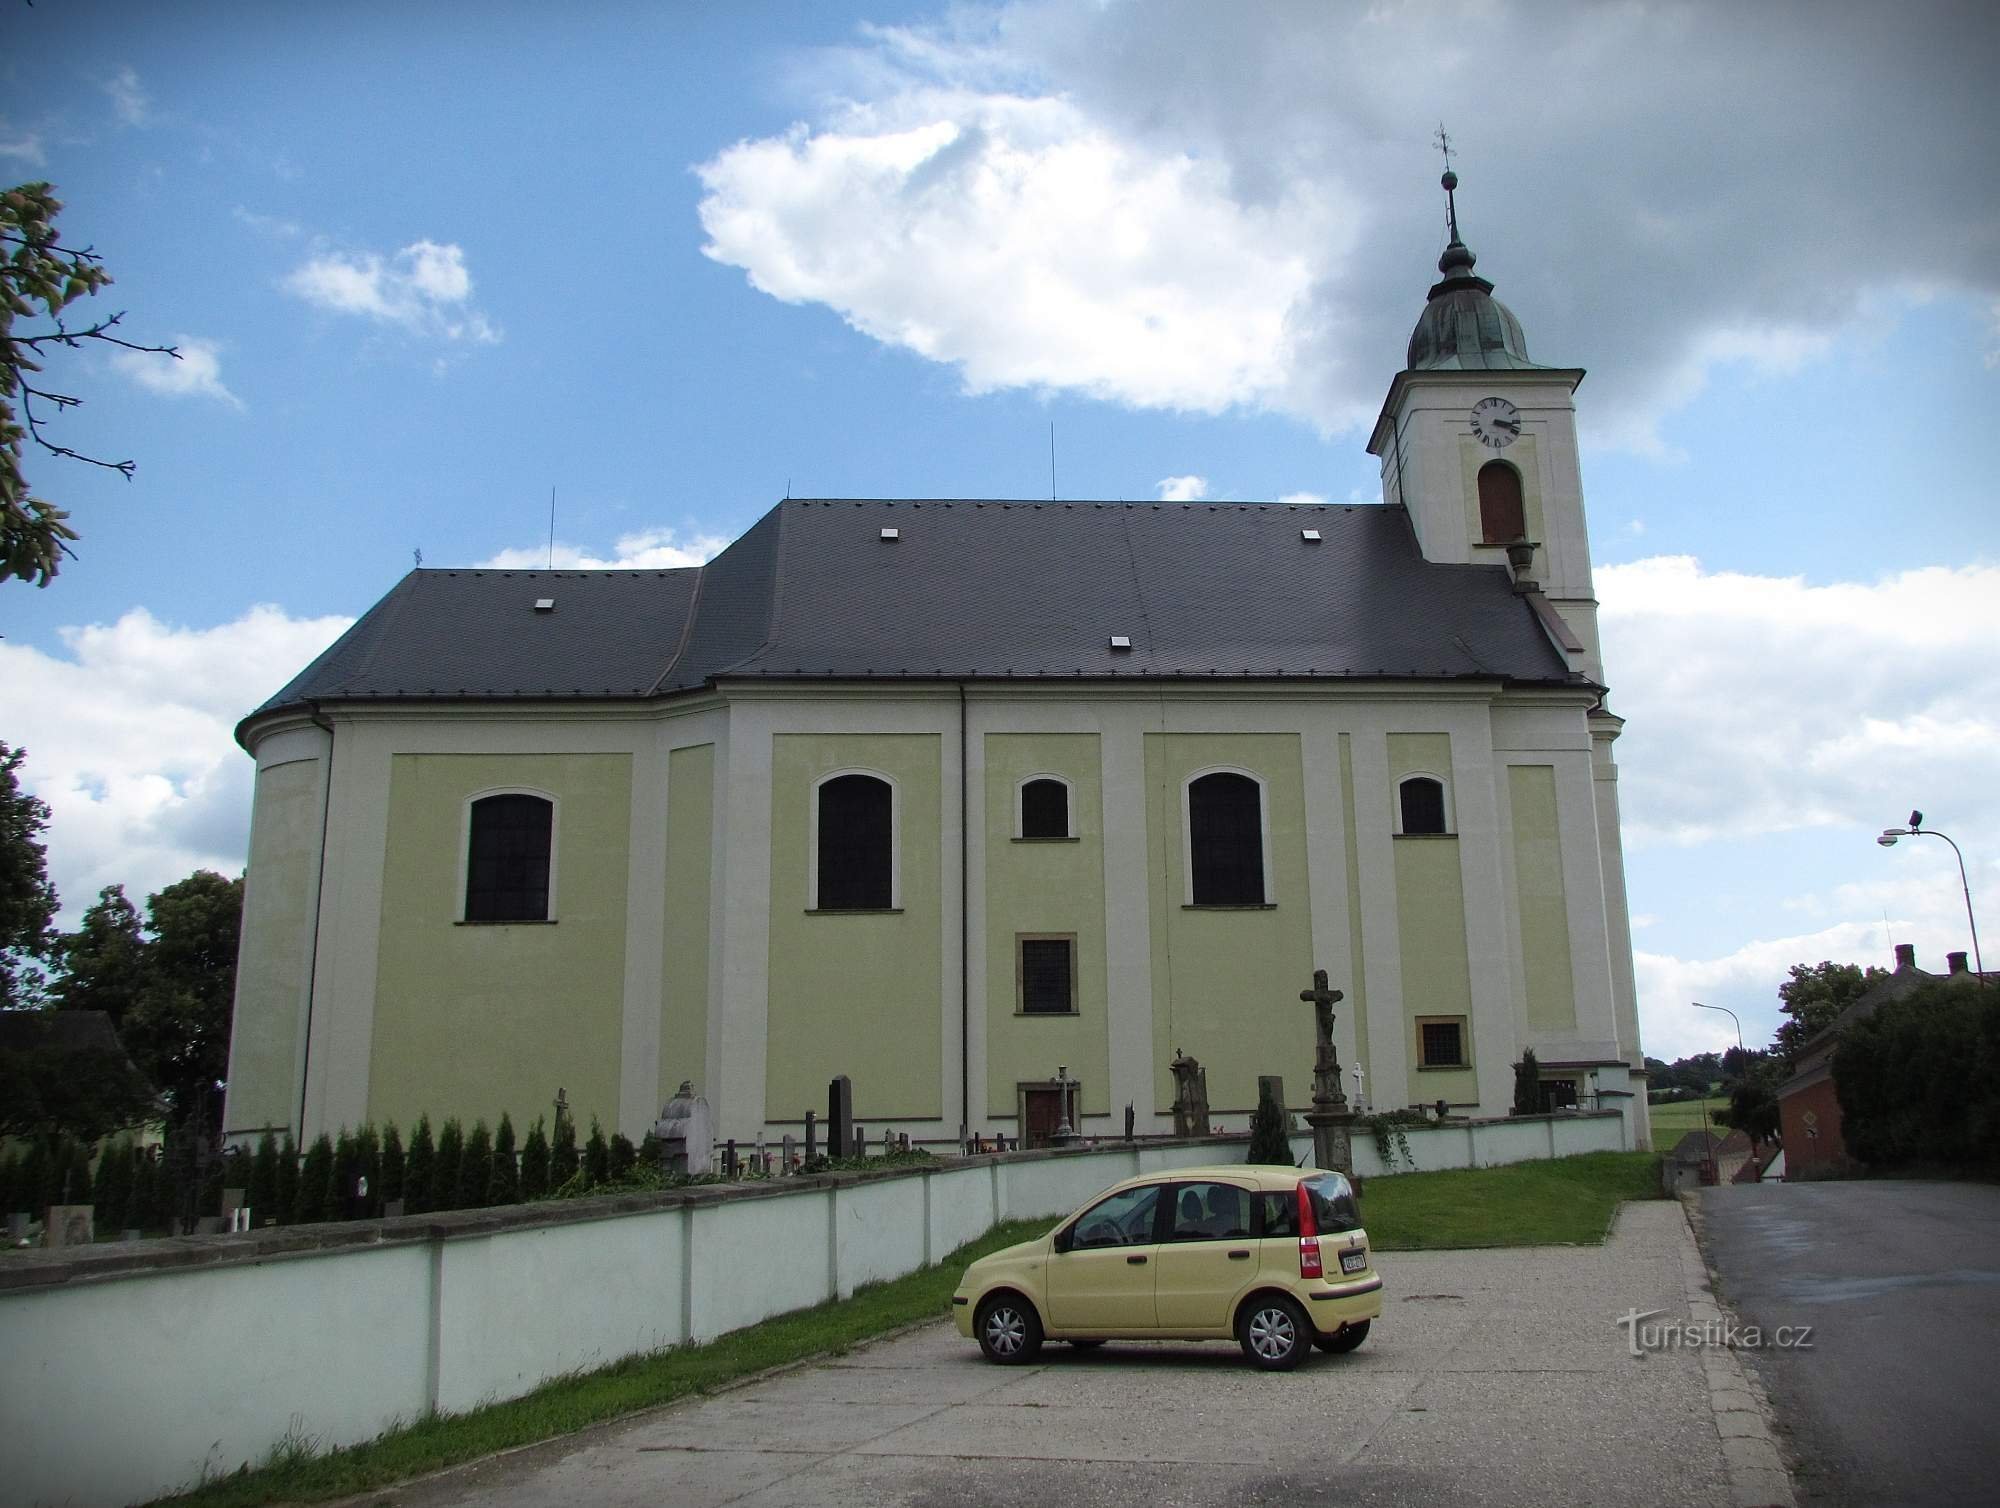 The town of Trnávka - the church of St. James the Elder